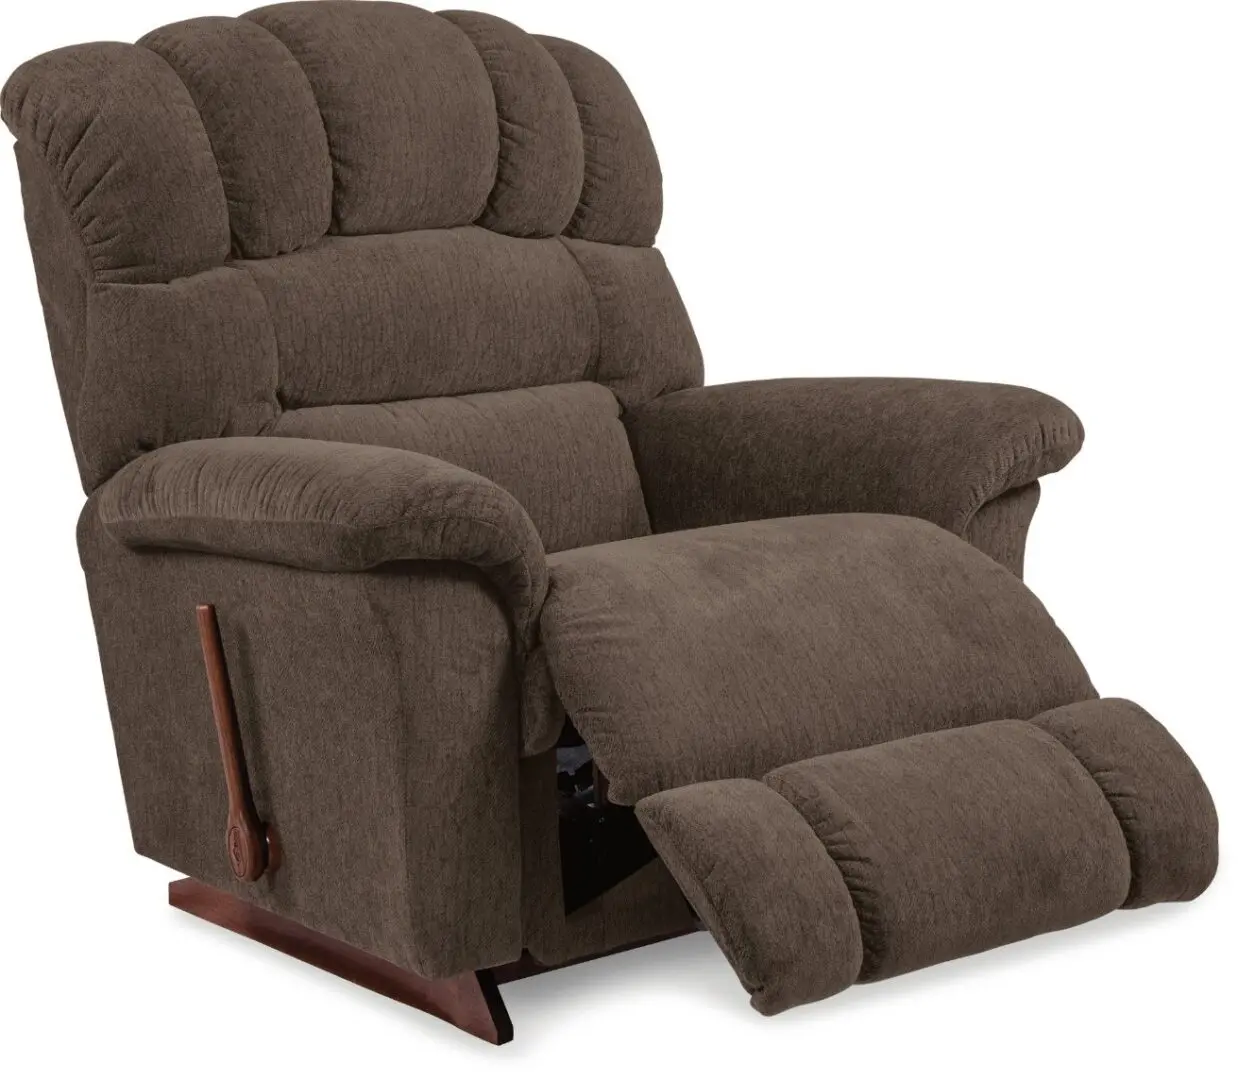 A brown recliner with wooden arms and legs.